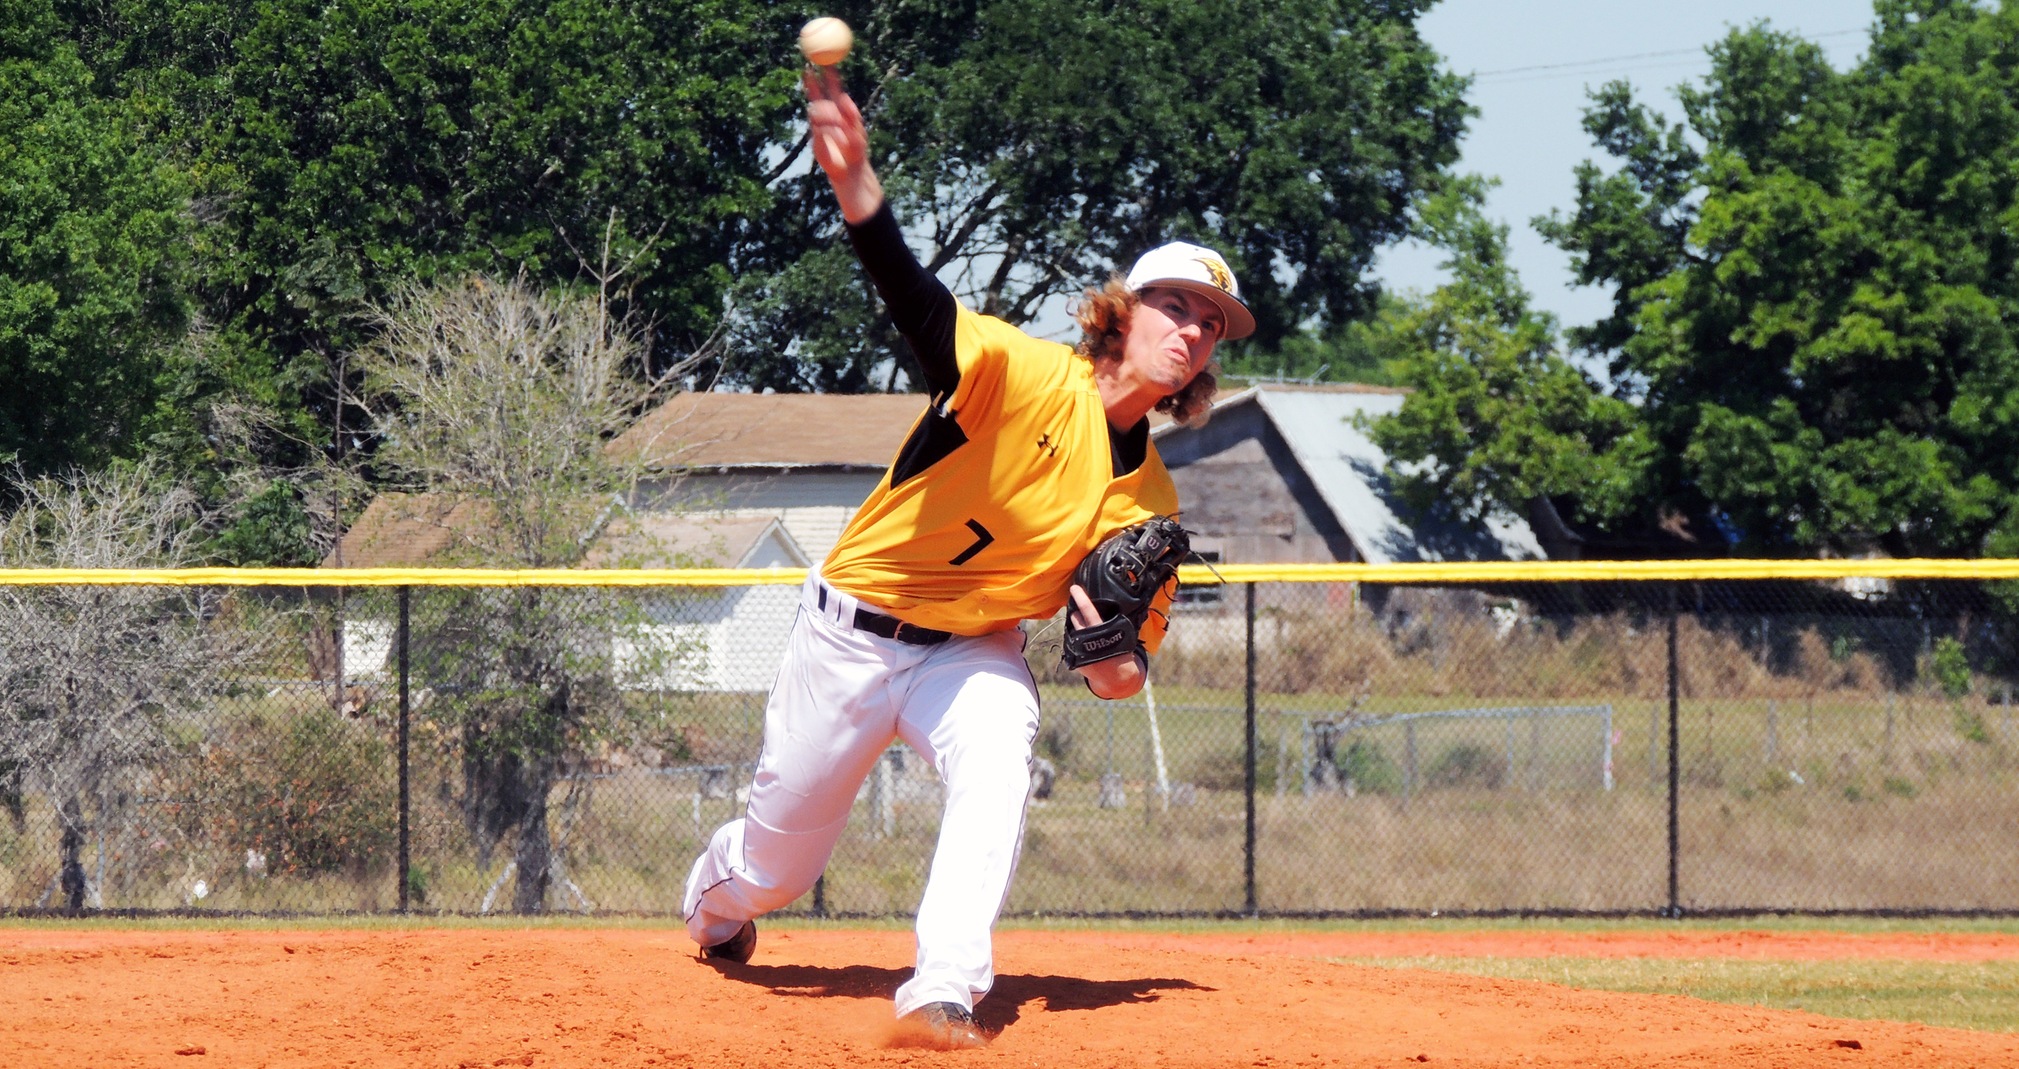 Jacob Pohlman pitched into the seventh inning and earned the win after yielding only one run and two hits with seven strikeouts.